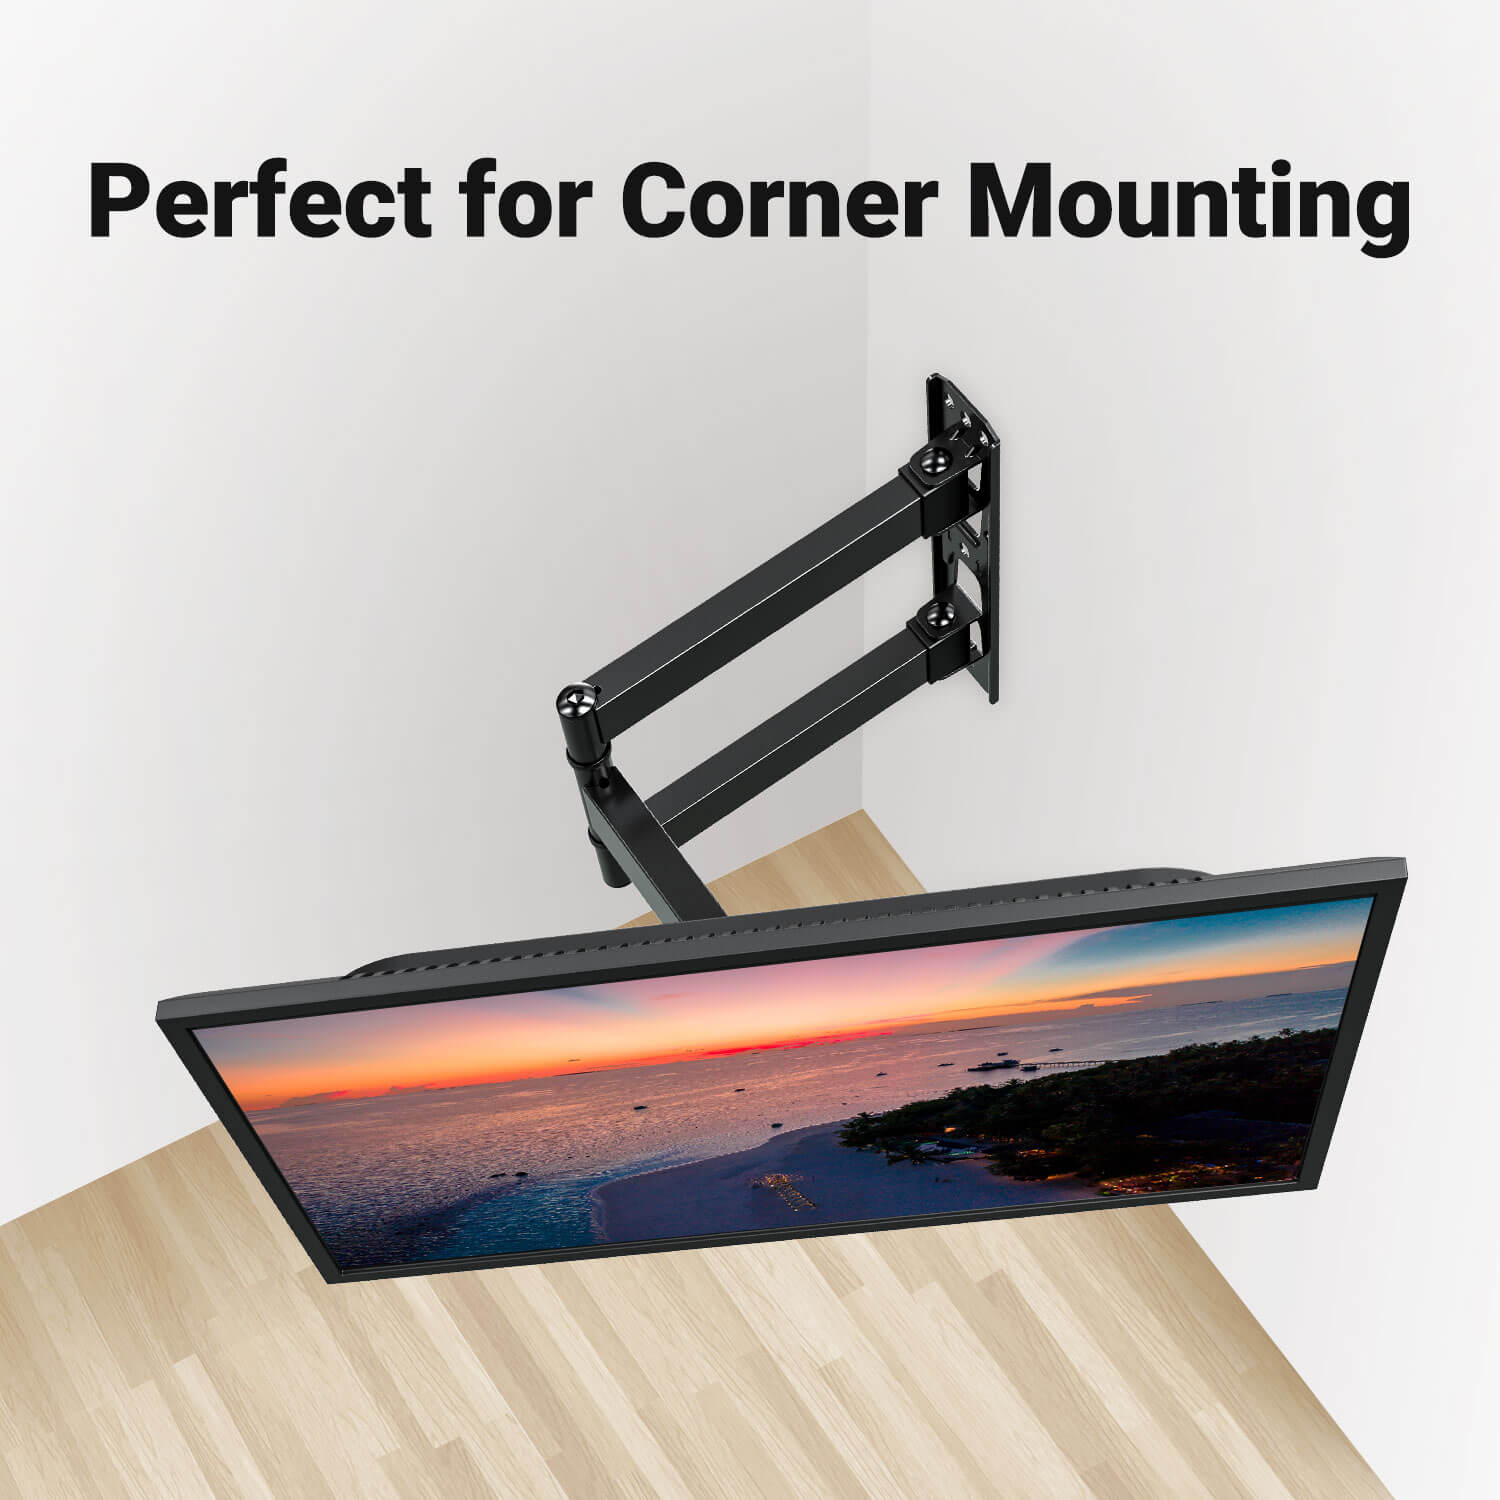 corner TV wall mount is perfect for corner mounting